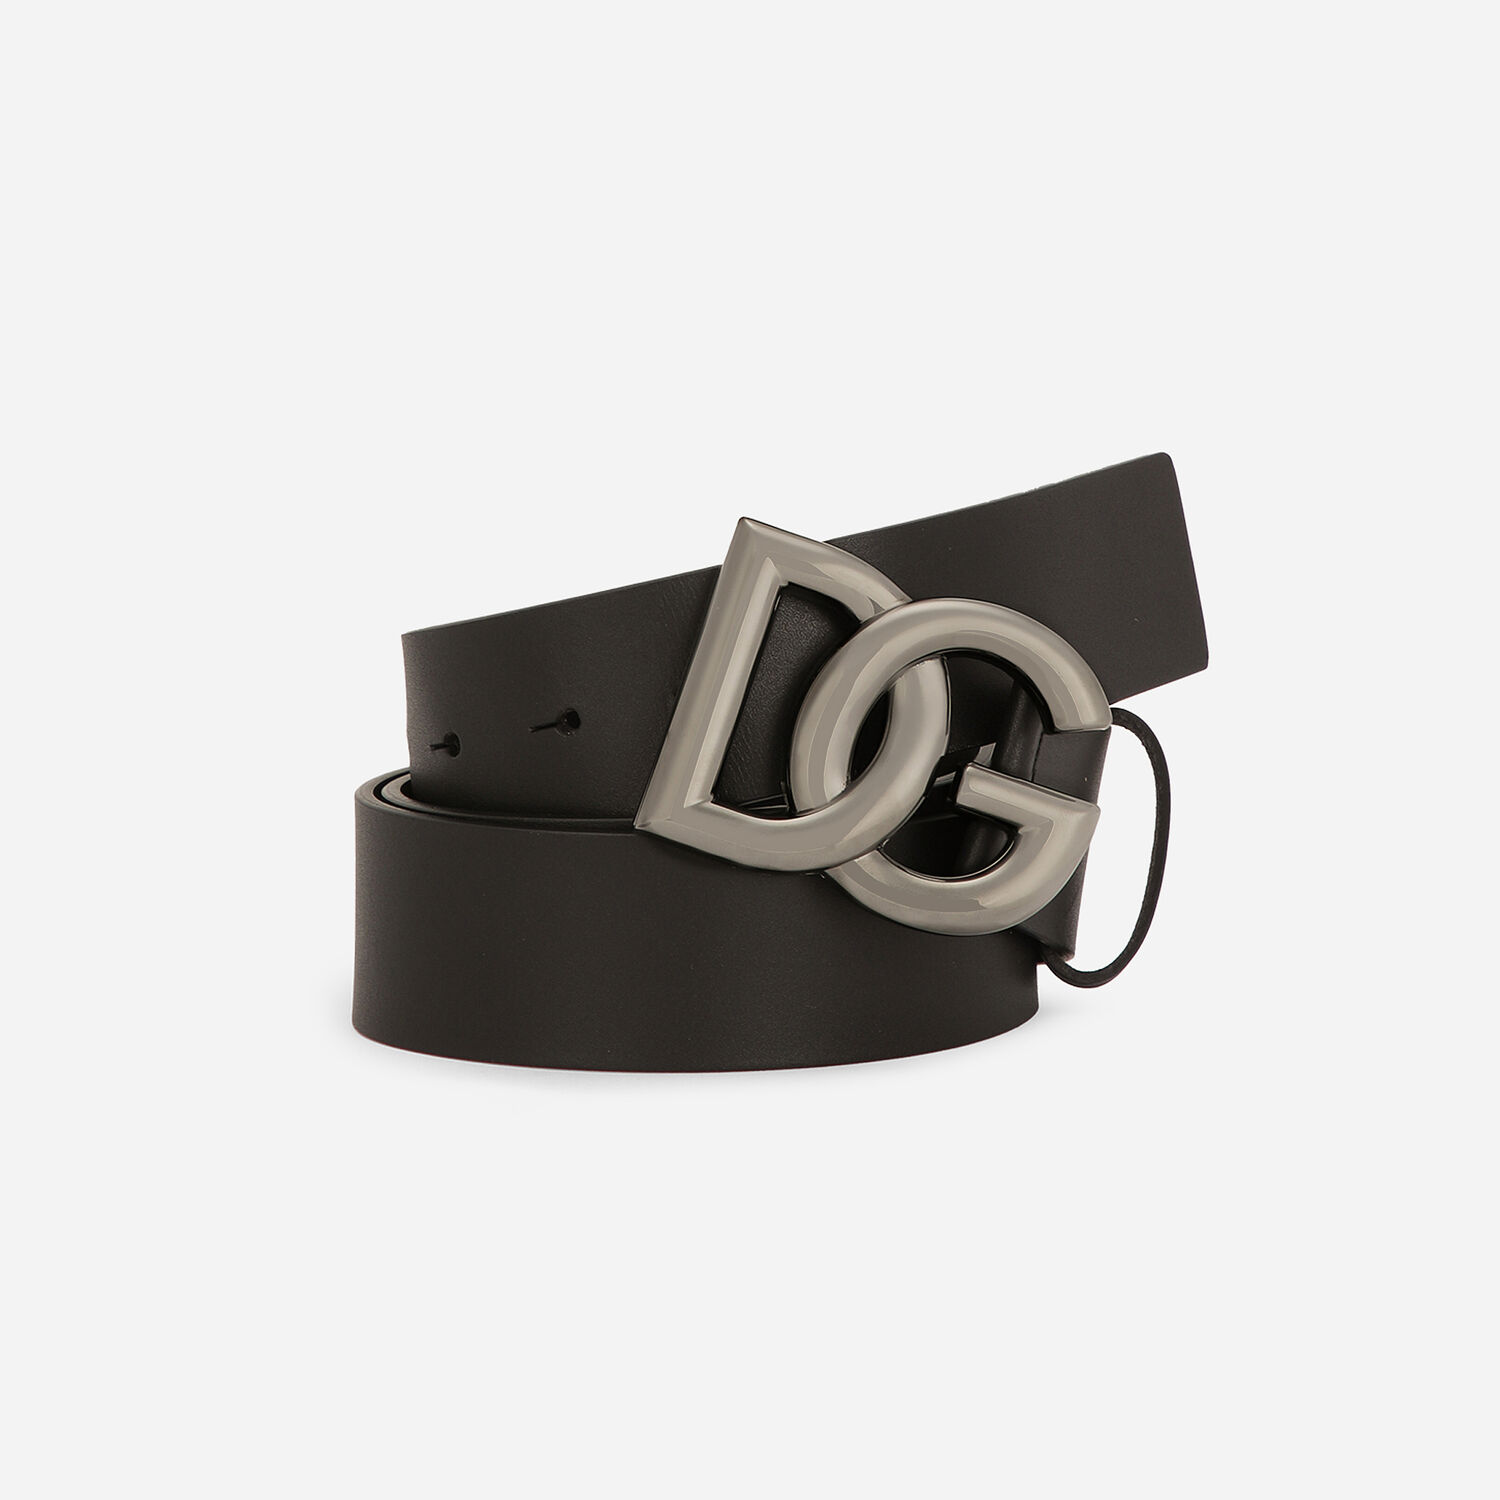 Lux leather belt with crossover DG logo buckle in Black for |  Dolce&Gabbana® US